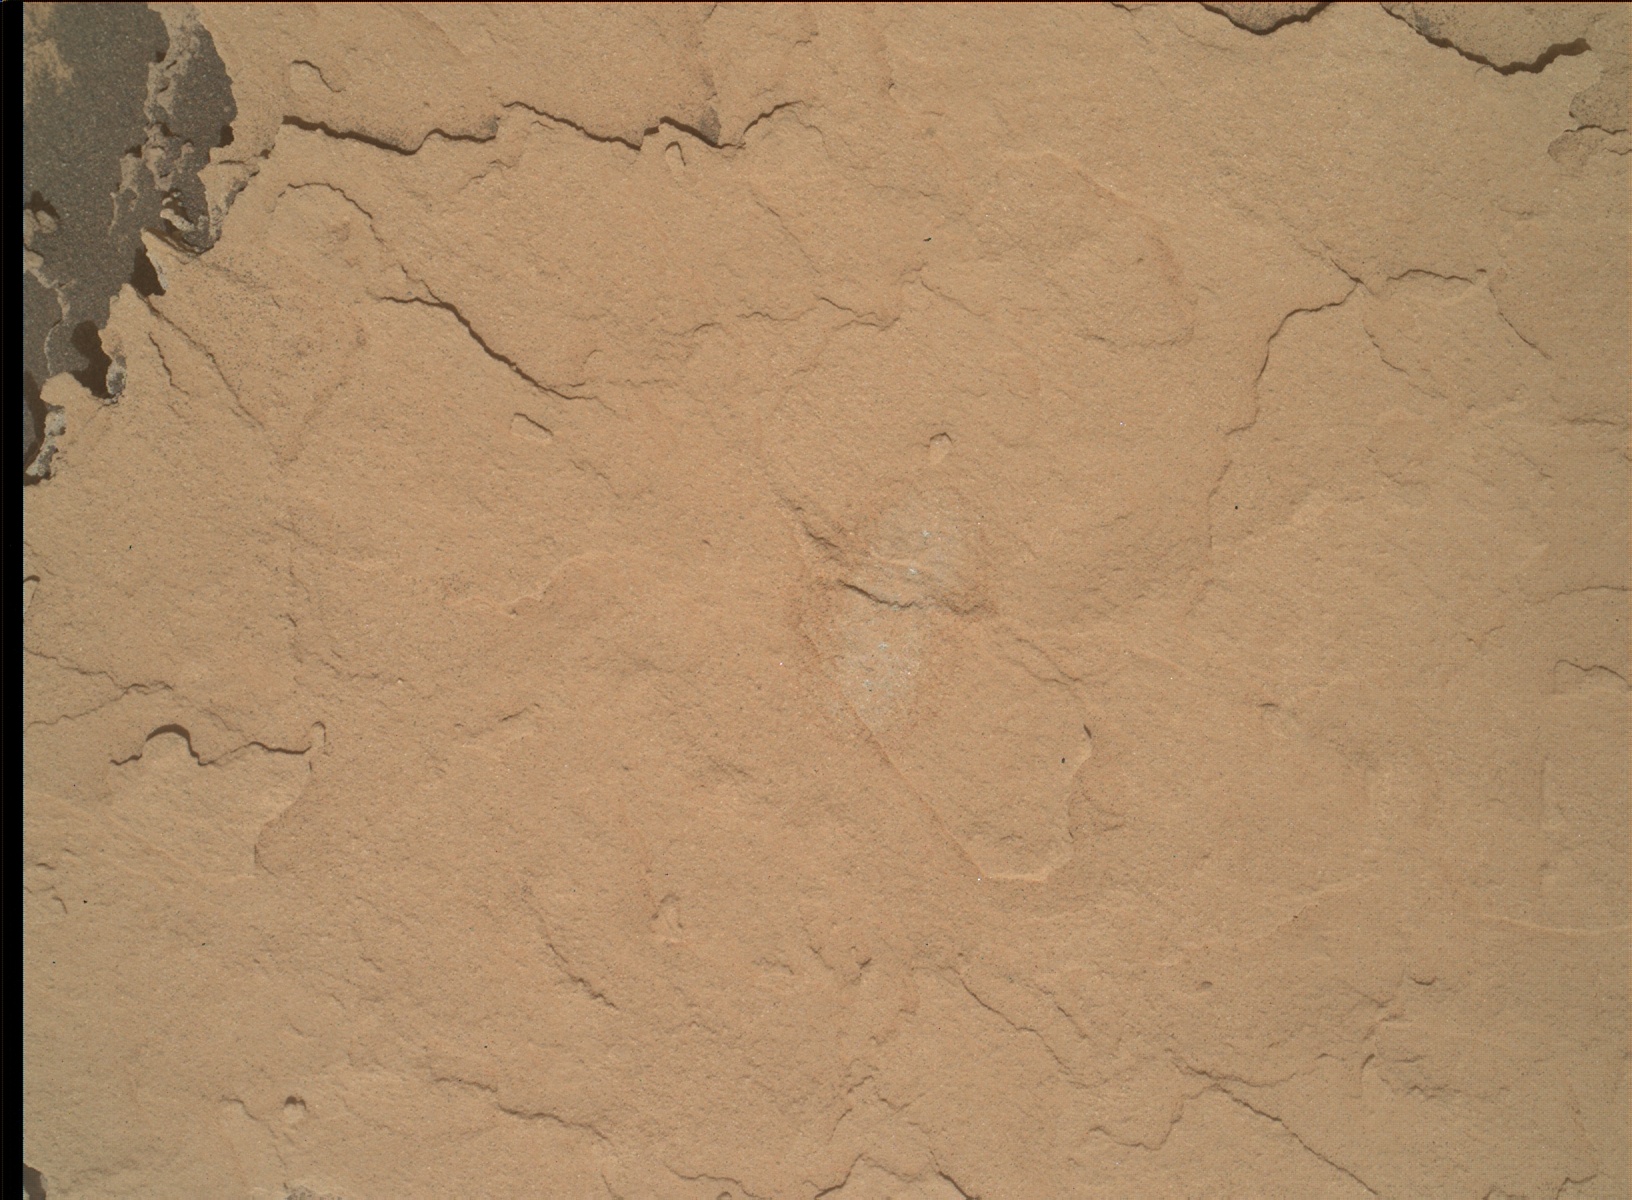 Nasa's Mars rover Curiosity acquired this image using its Mars Hand Lens Imager (MAHLI) on Sol 3531